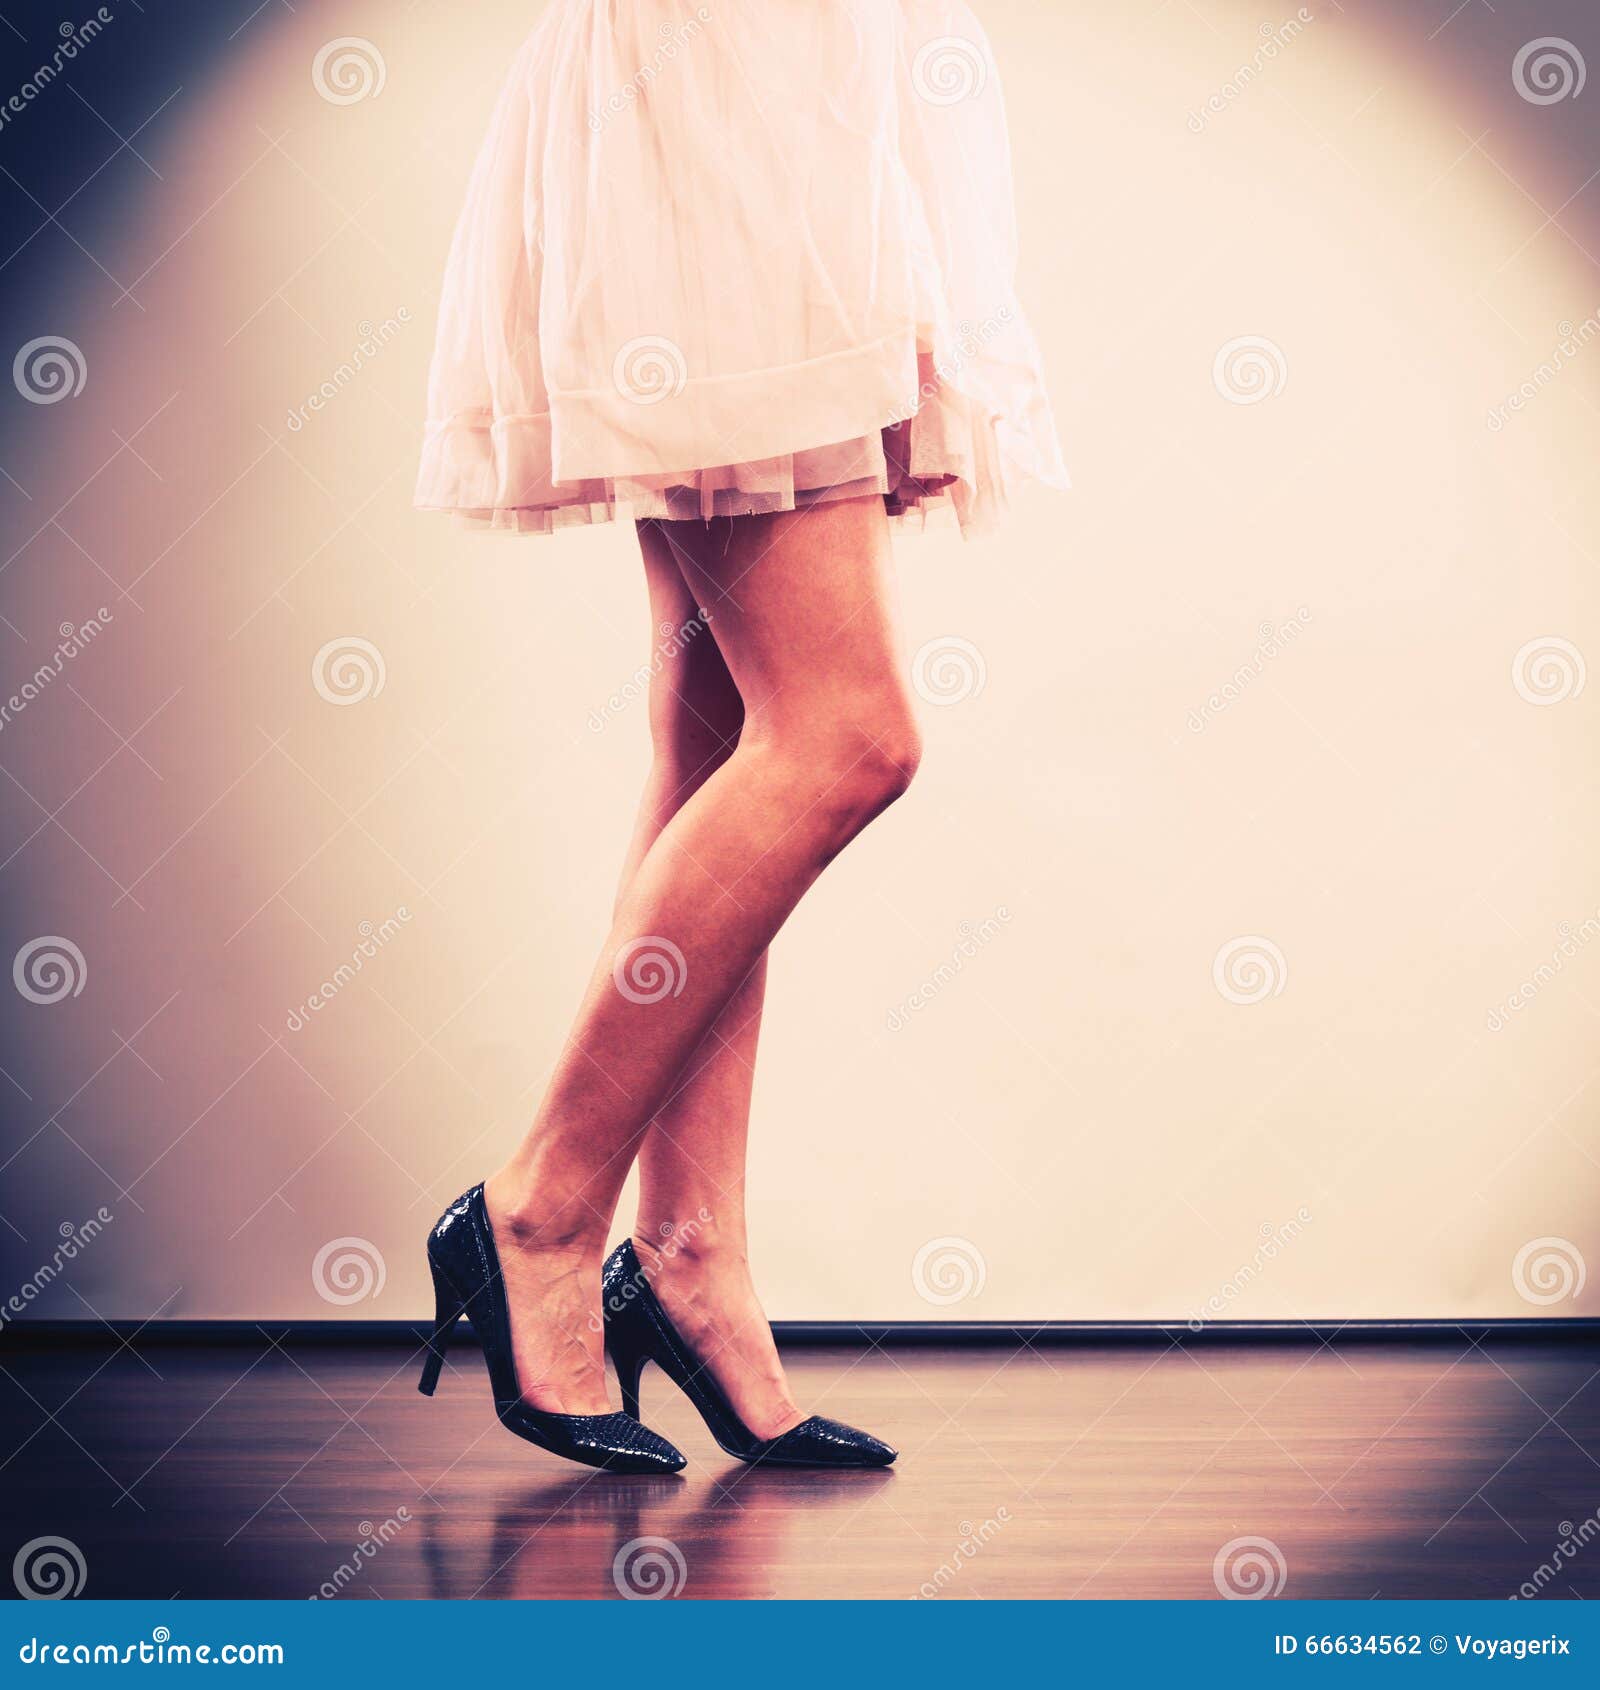 17,139 Female Legs High Heels Shoes Stock Photos - Free & Royalty-Free ...